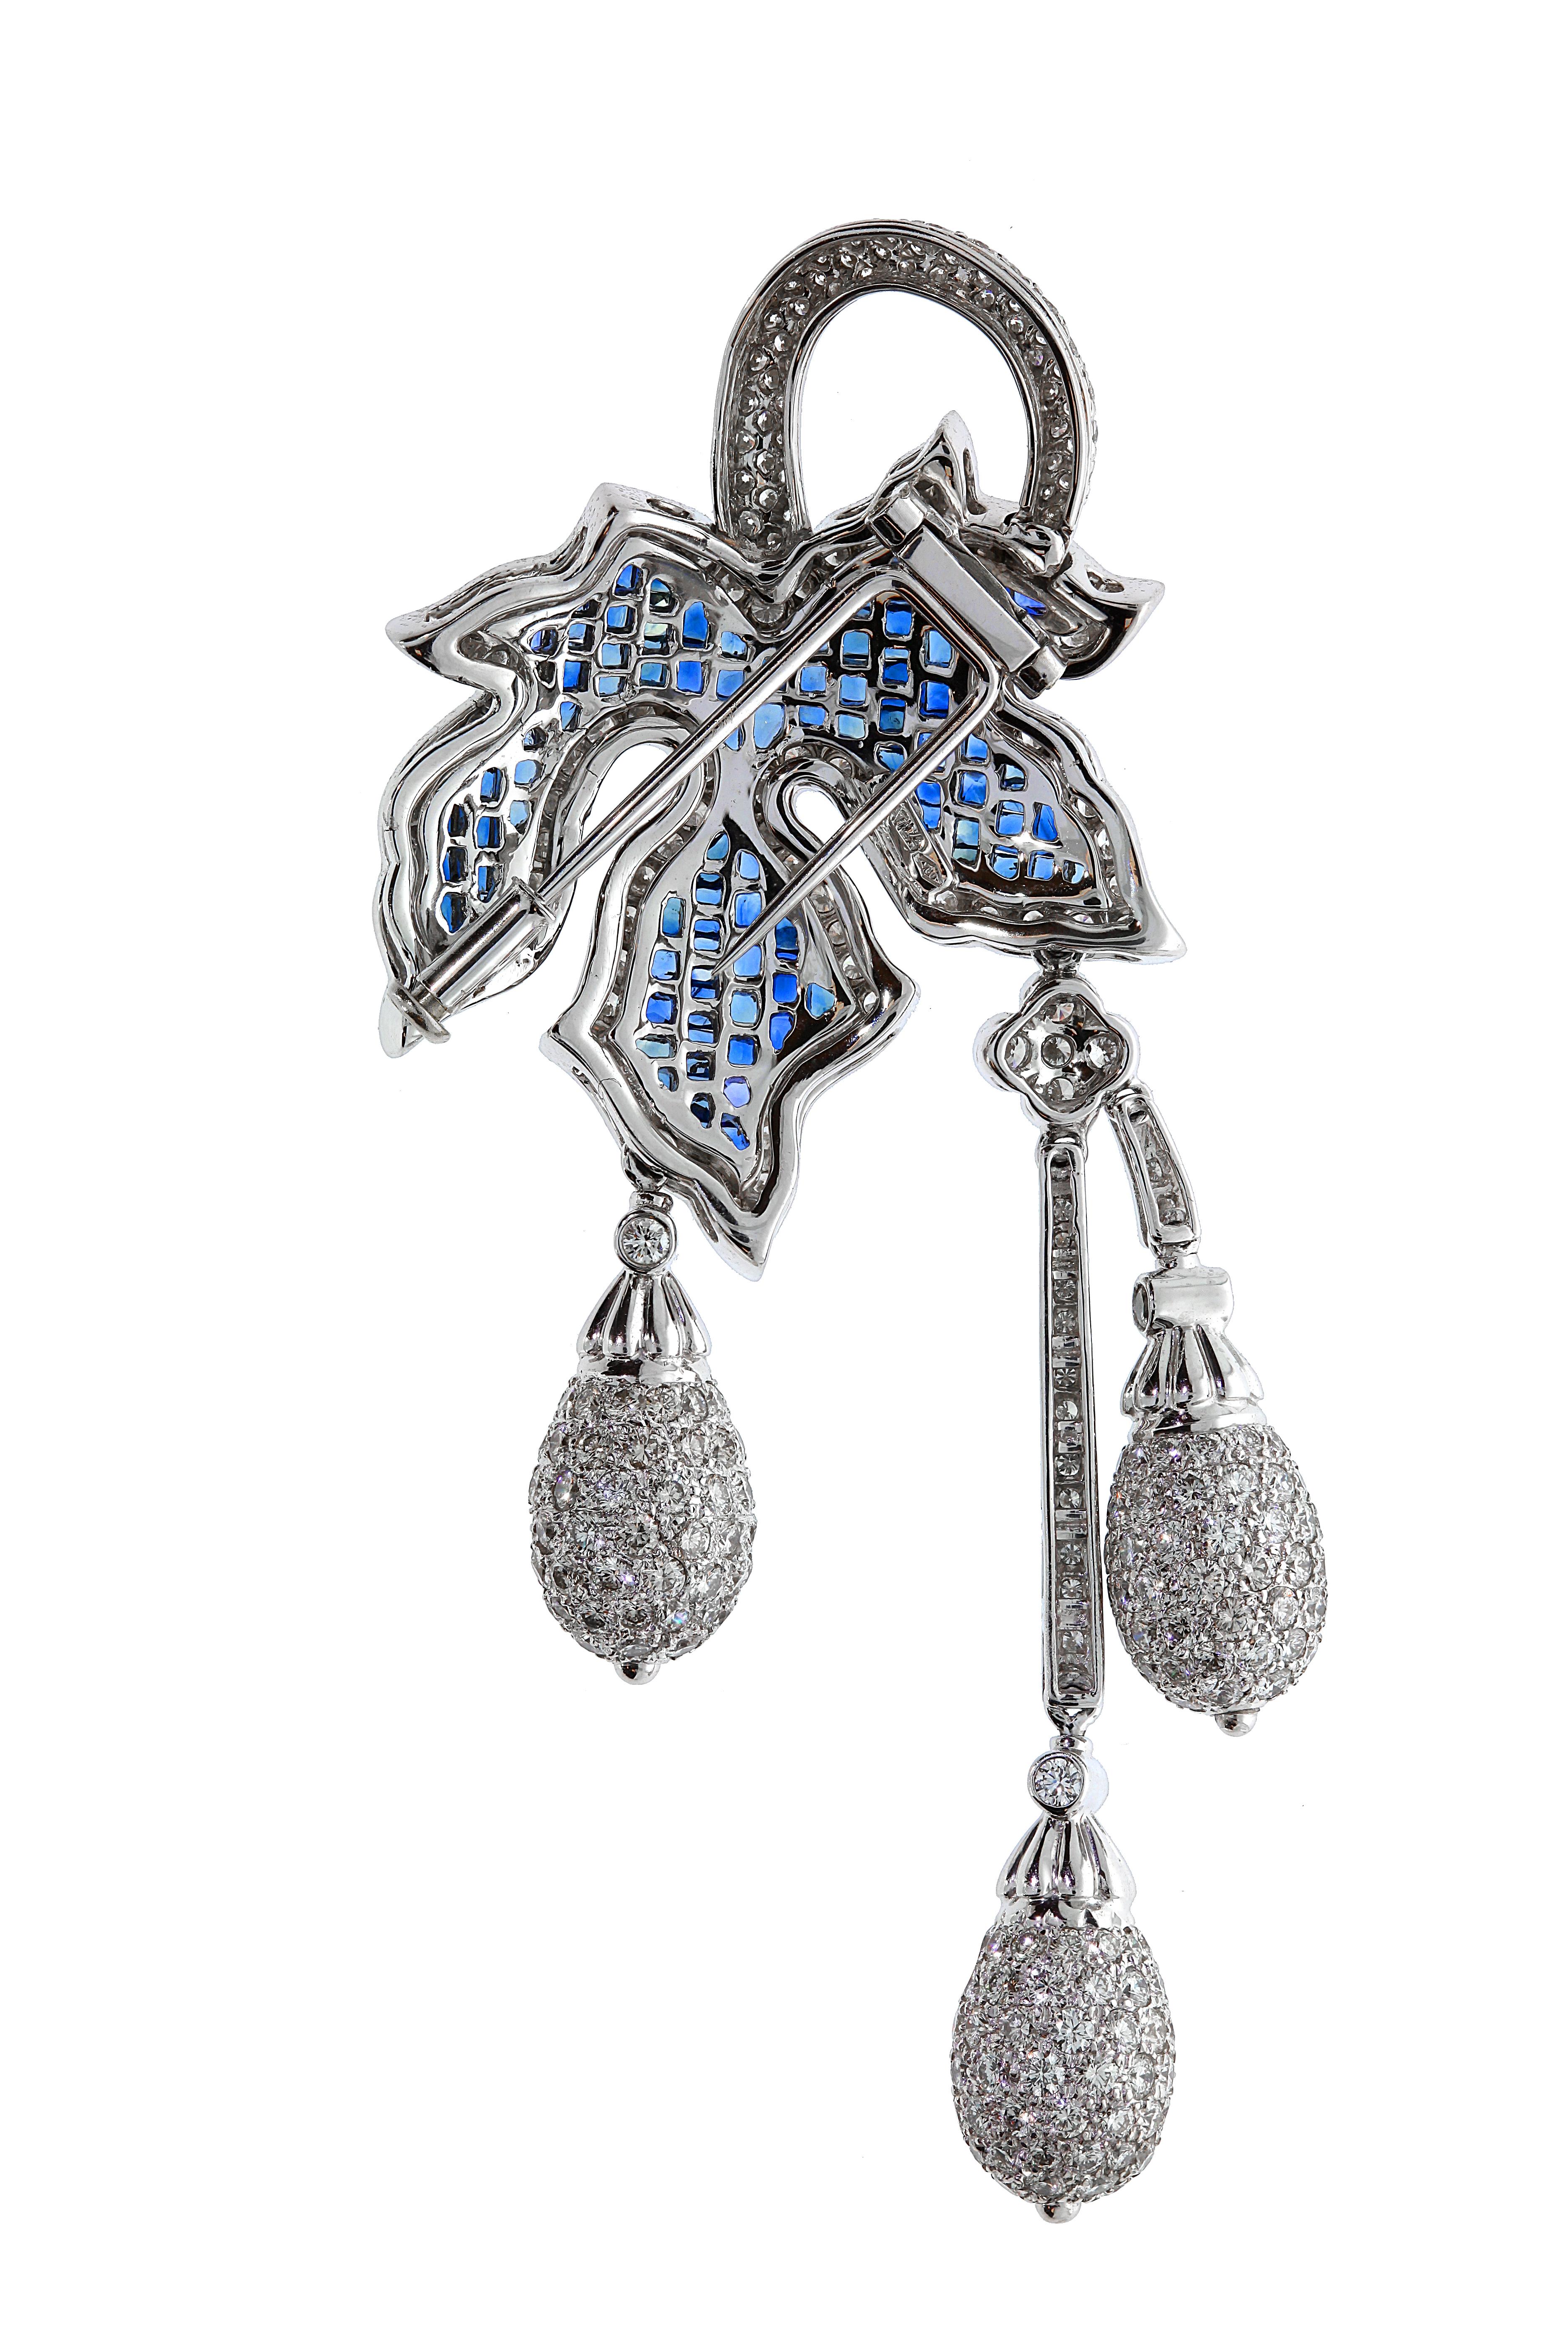 Chatila 18 carat white gold mystery set blue sapphire brooch with a diamond border and 3 teardrop clusters dangling at different heights. A perfectly balanced mixture of traditional and modern.

Details:

-399 diamonds with a total weight of 8.82